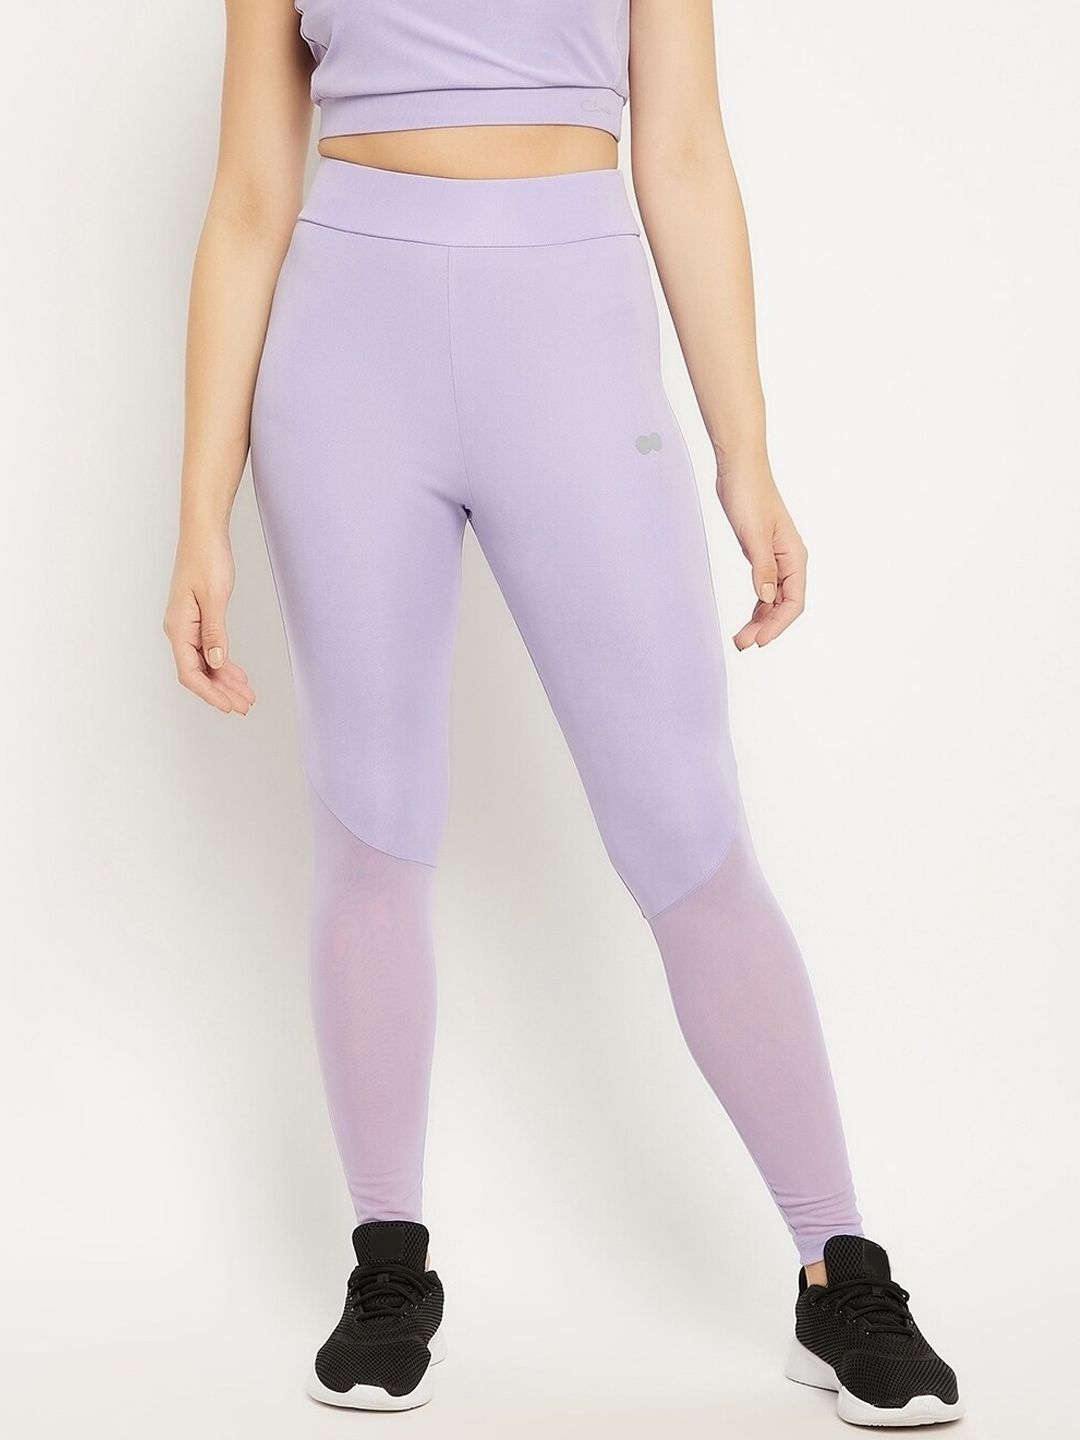 Clovia Women Purple Solid Ankle-Length Tights Price in India